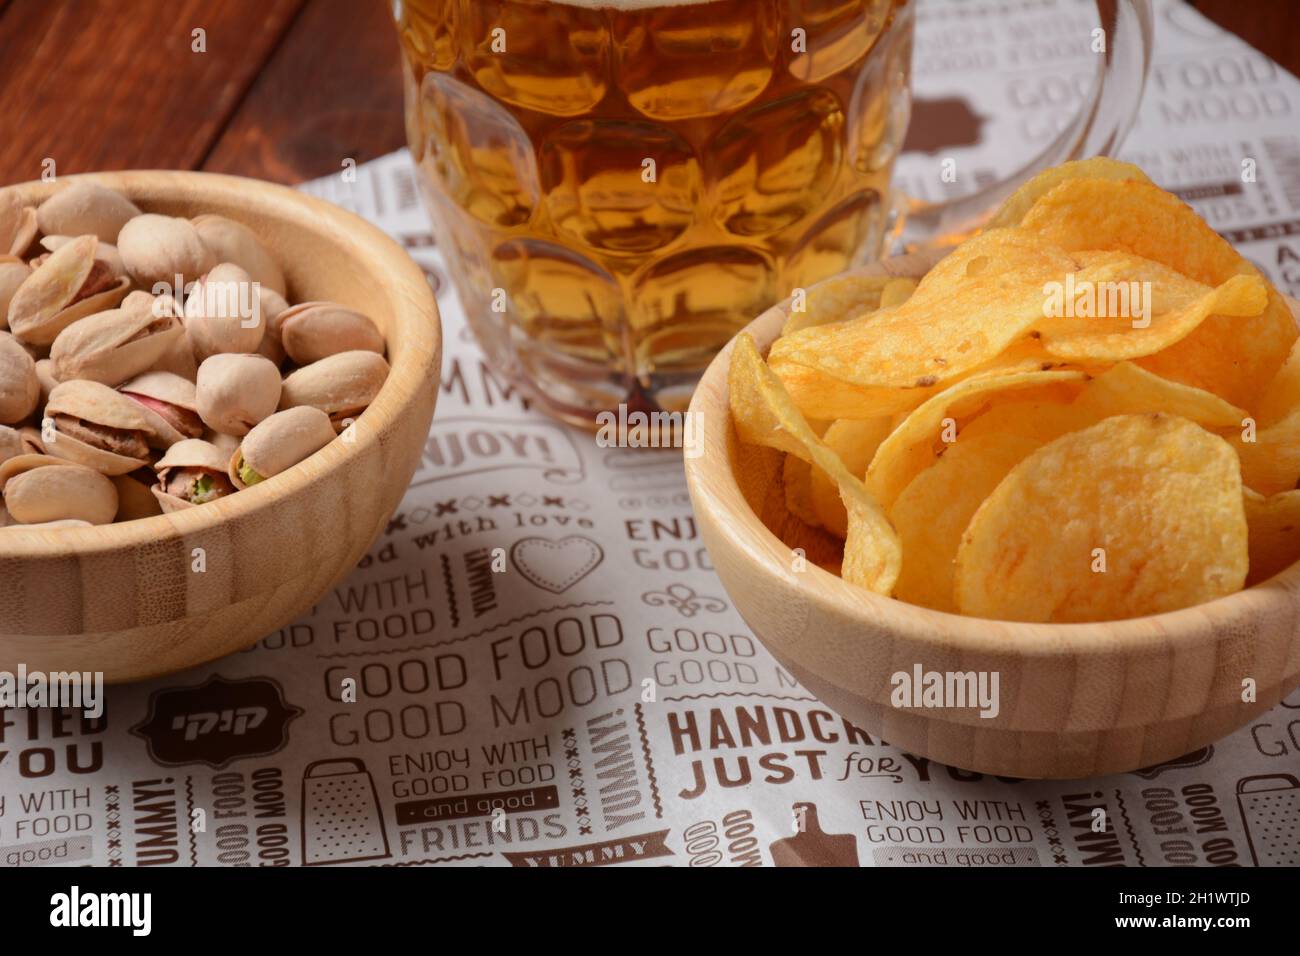 A mug of cold beer with pistachio nuts, and potato chips in wooden bowls. Stock Photo